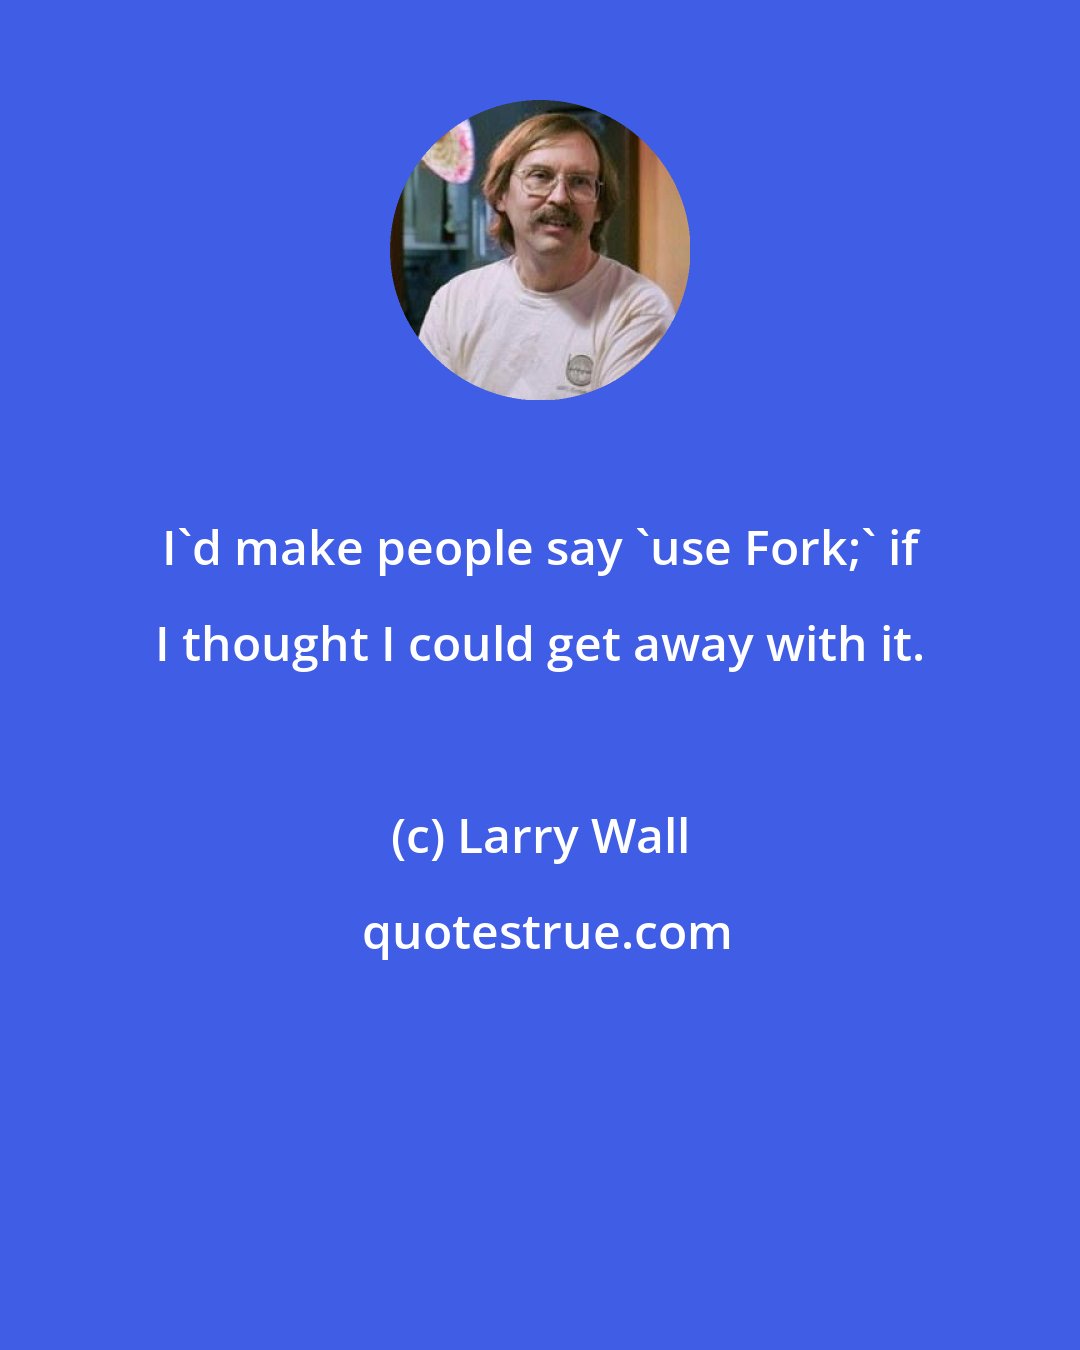 Larry Wall: I'd make people say 'use Fork;' if I thought I could get away with it.